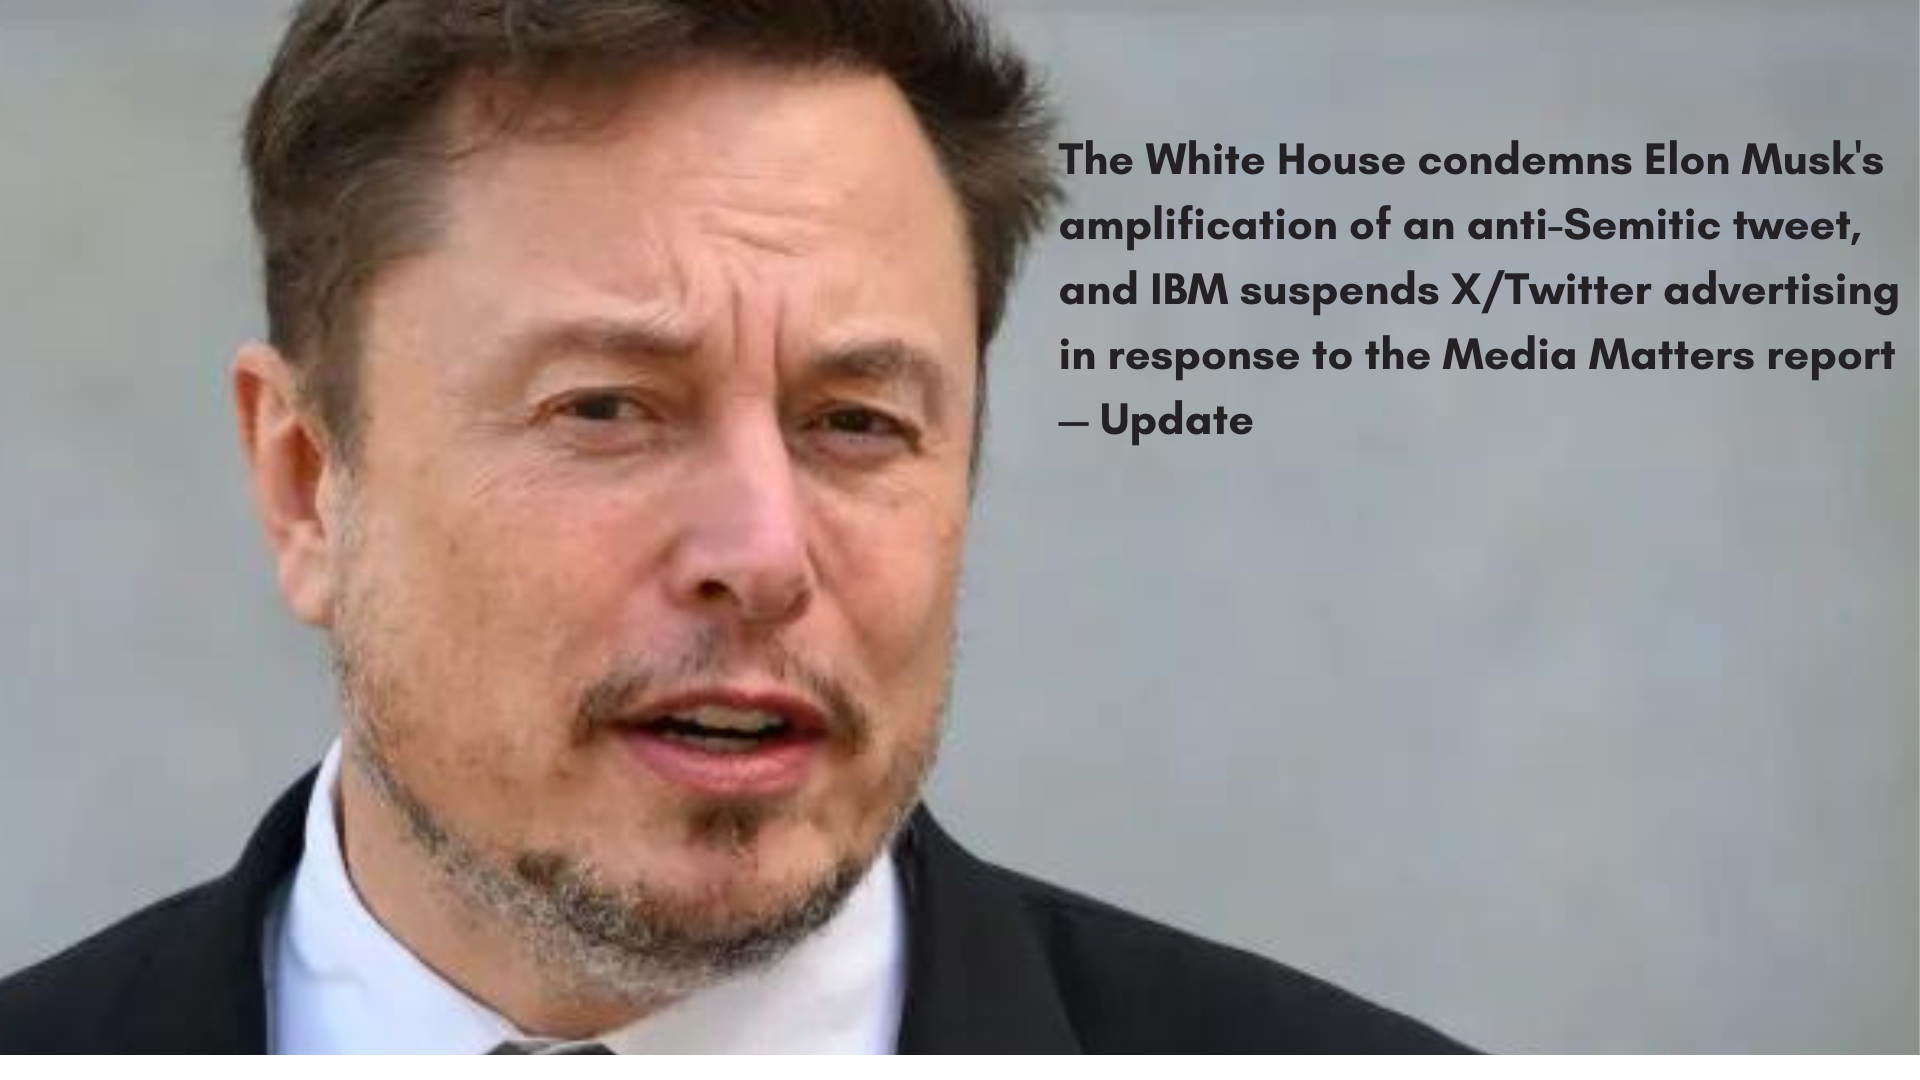 You are currently viewing The White House condemns Elon Musk’s amplification of an anti-Semitic tweet, and IBM suspends X/Twitter advertising in response to the Media Matters report — Update